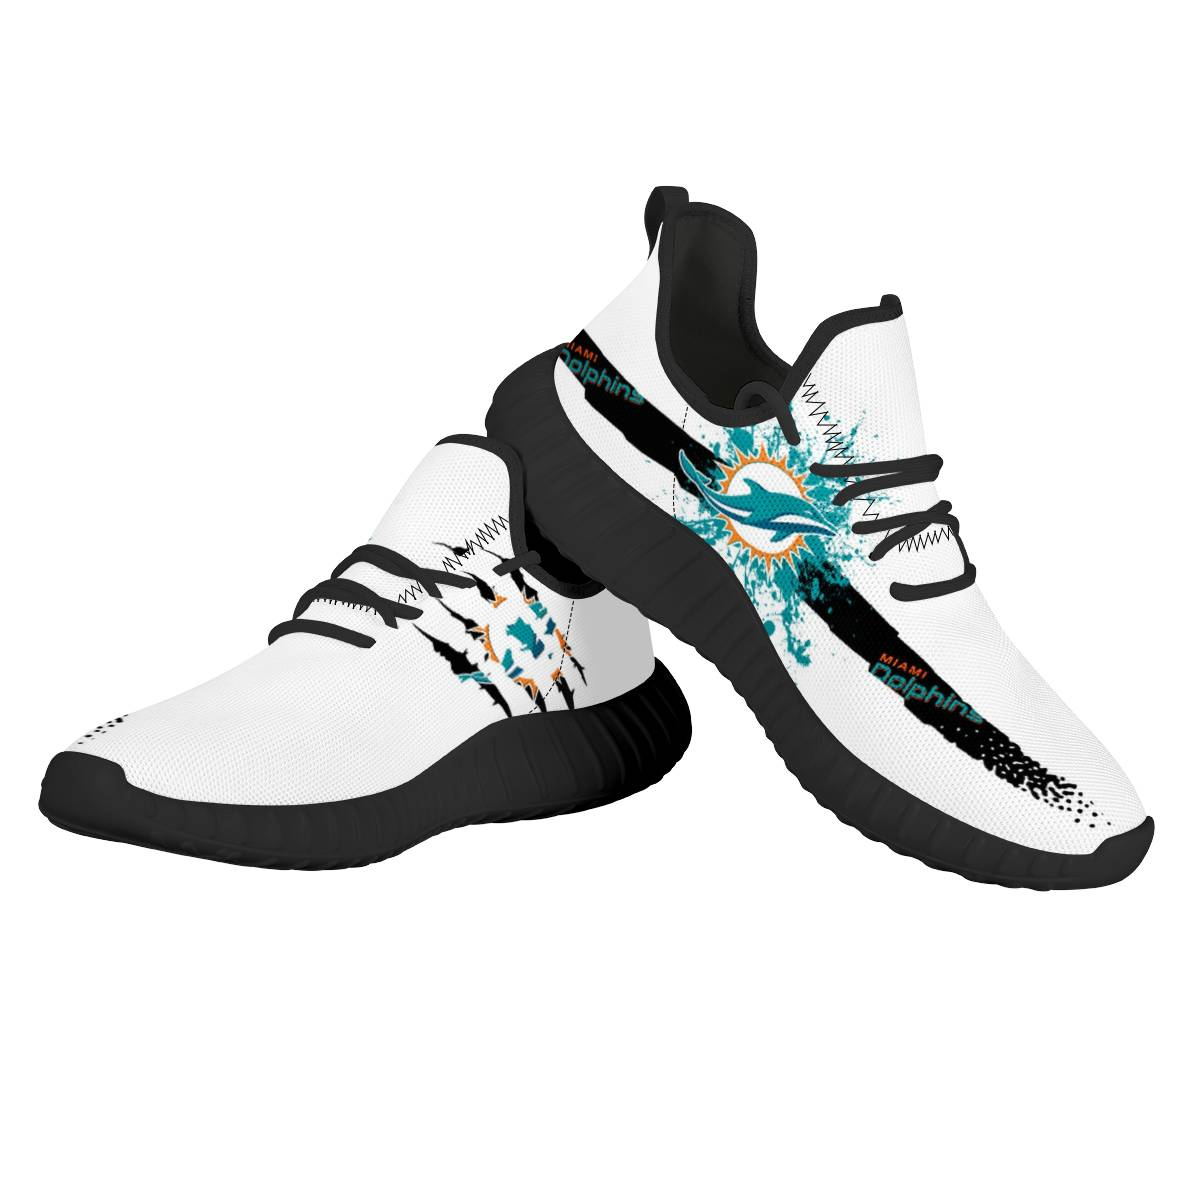 Women's Miami Dolphins Mesh Knit Sneakers/Shoes 007